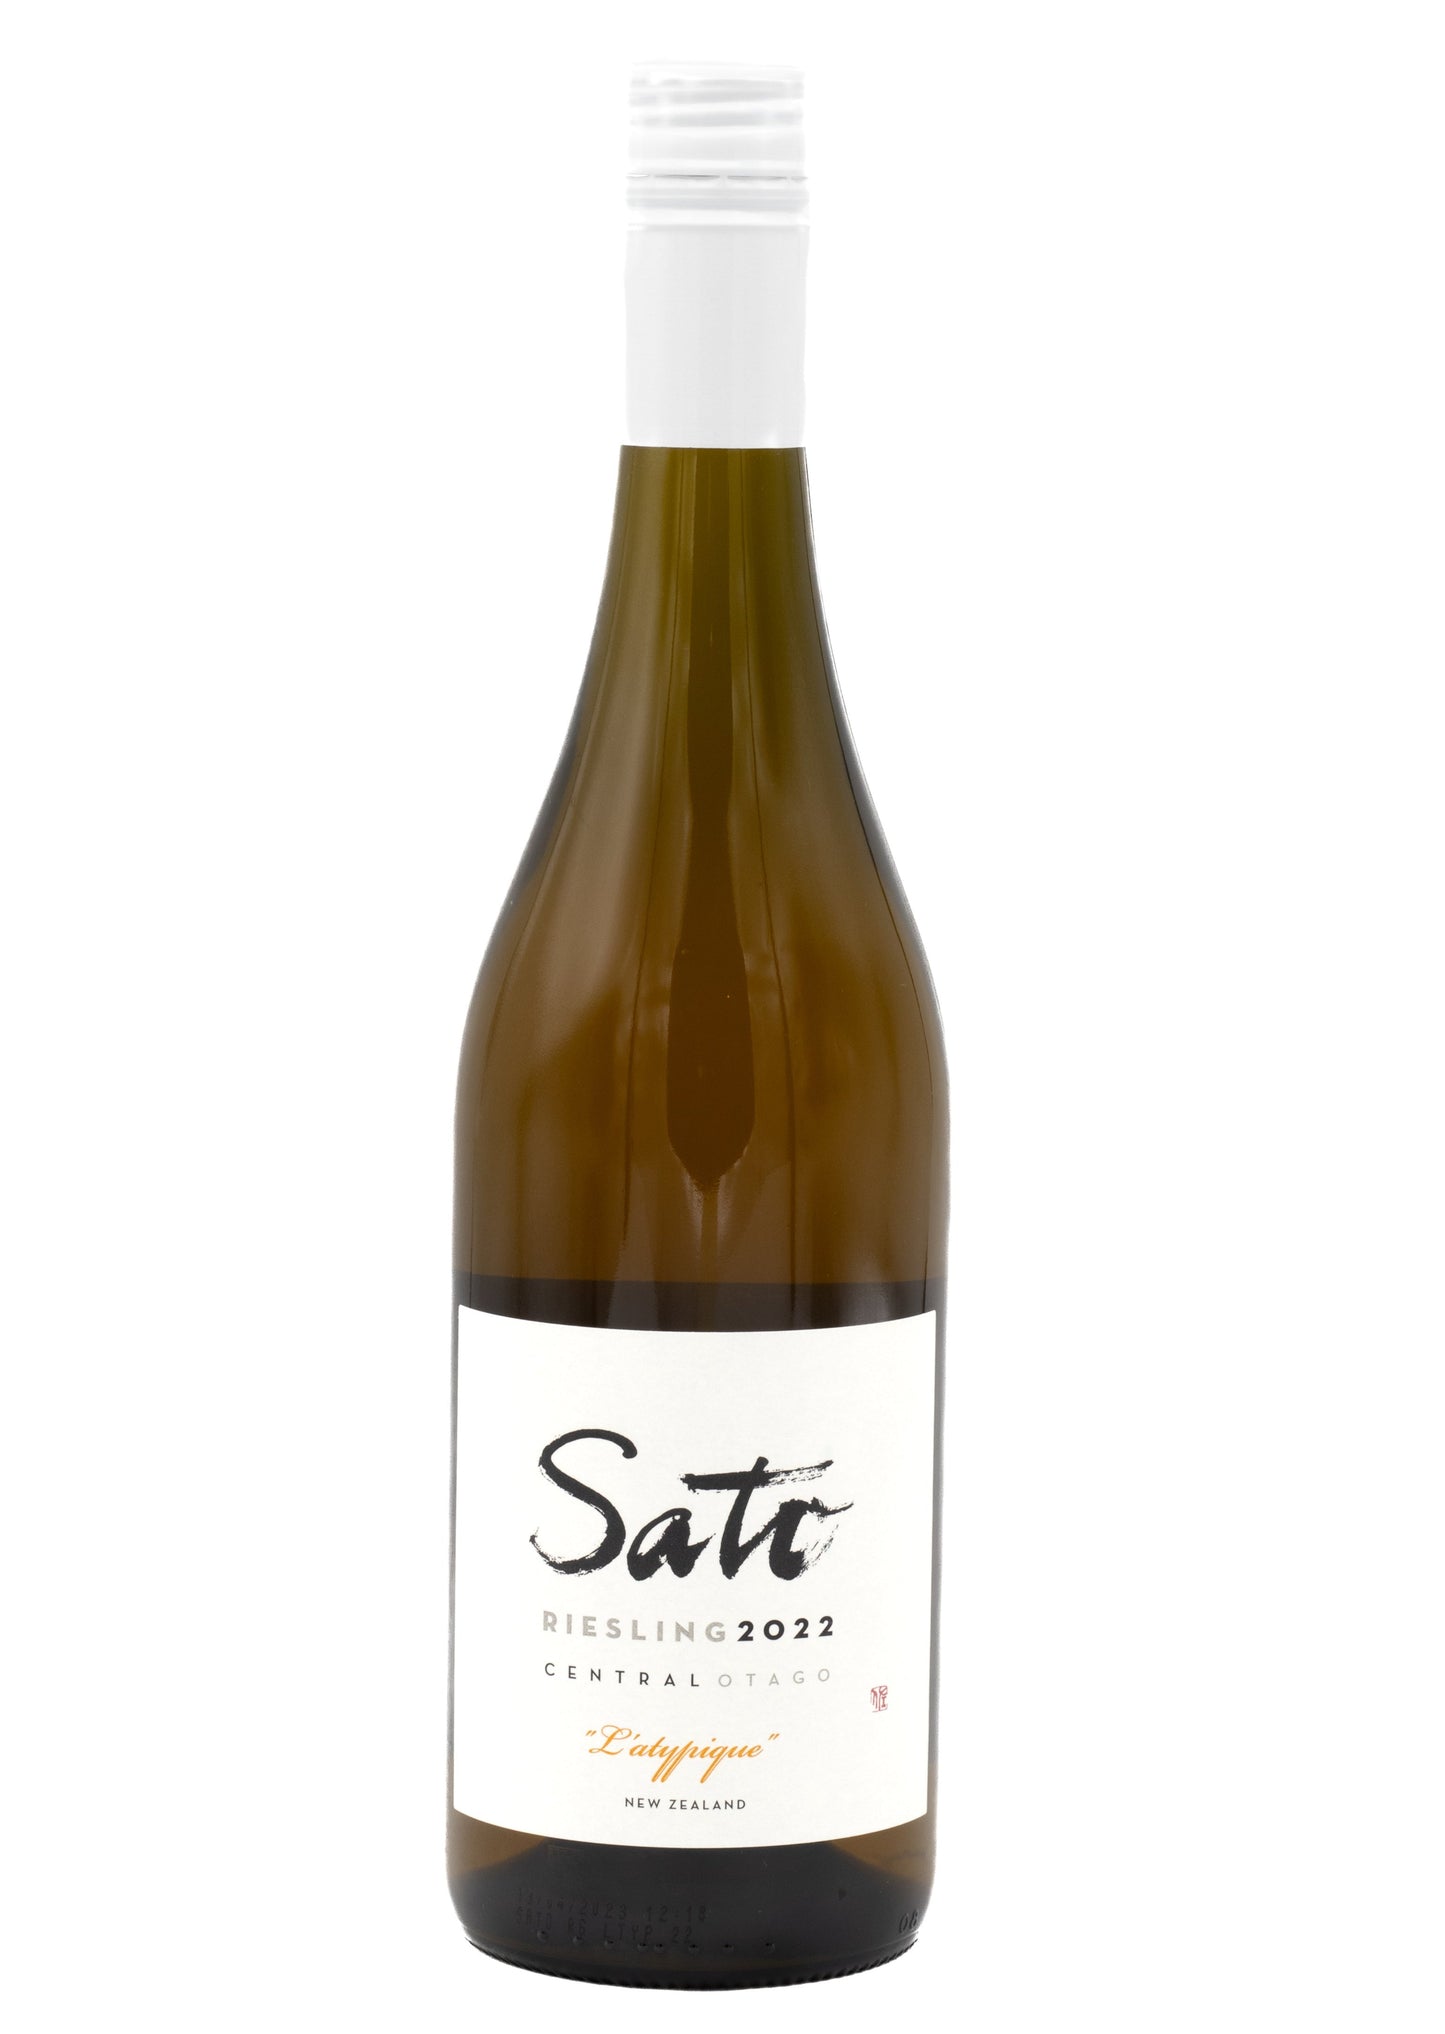 Sato Riesling L'Atypique 2022 - SOLD OUT